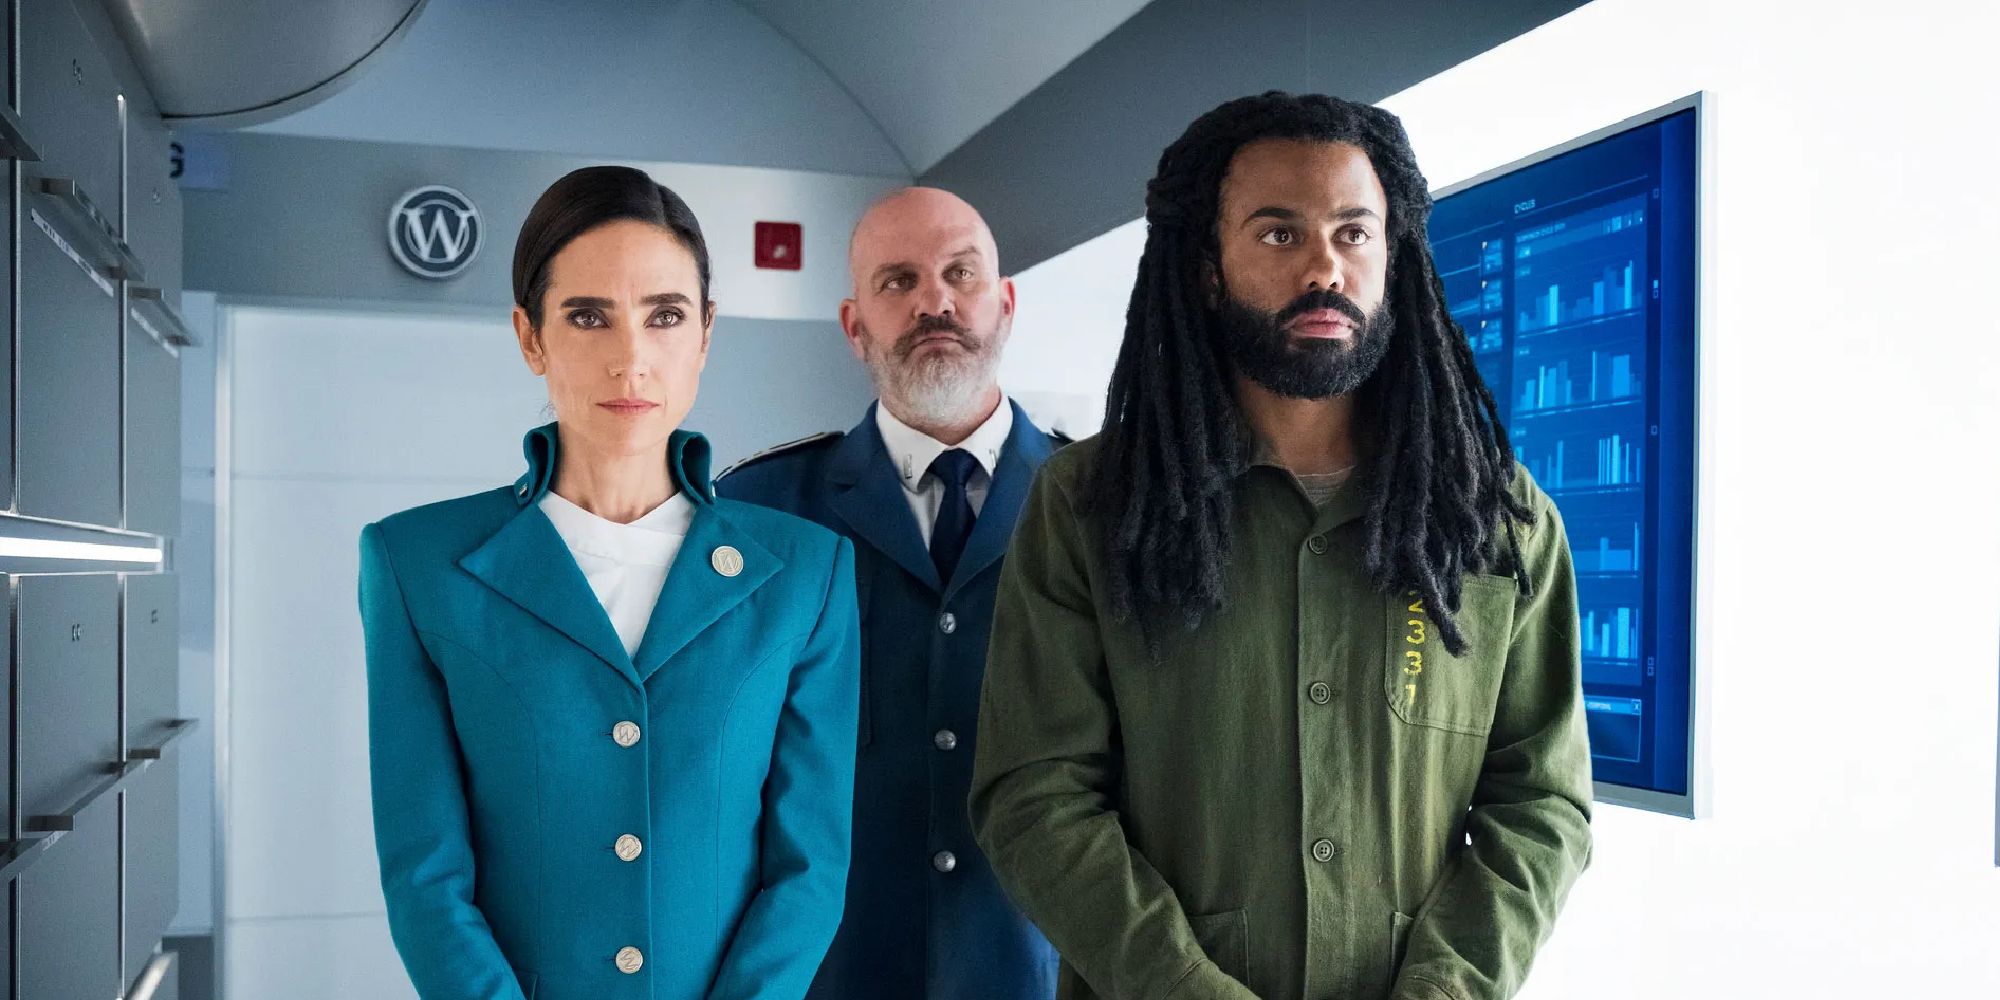 Jennifer Connelly, Mike O'Malley and Daveed Diggs standing together in Snowpiercer